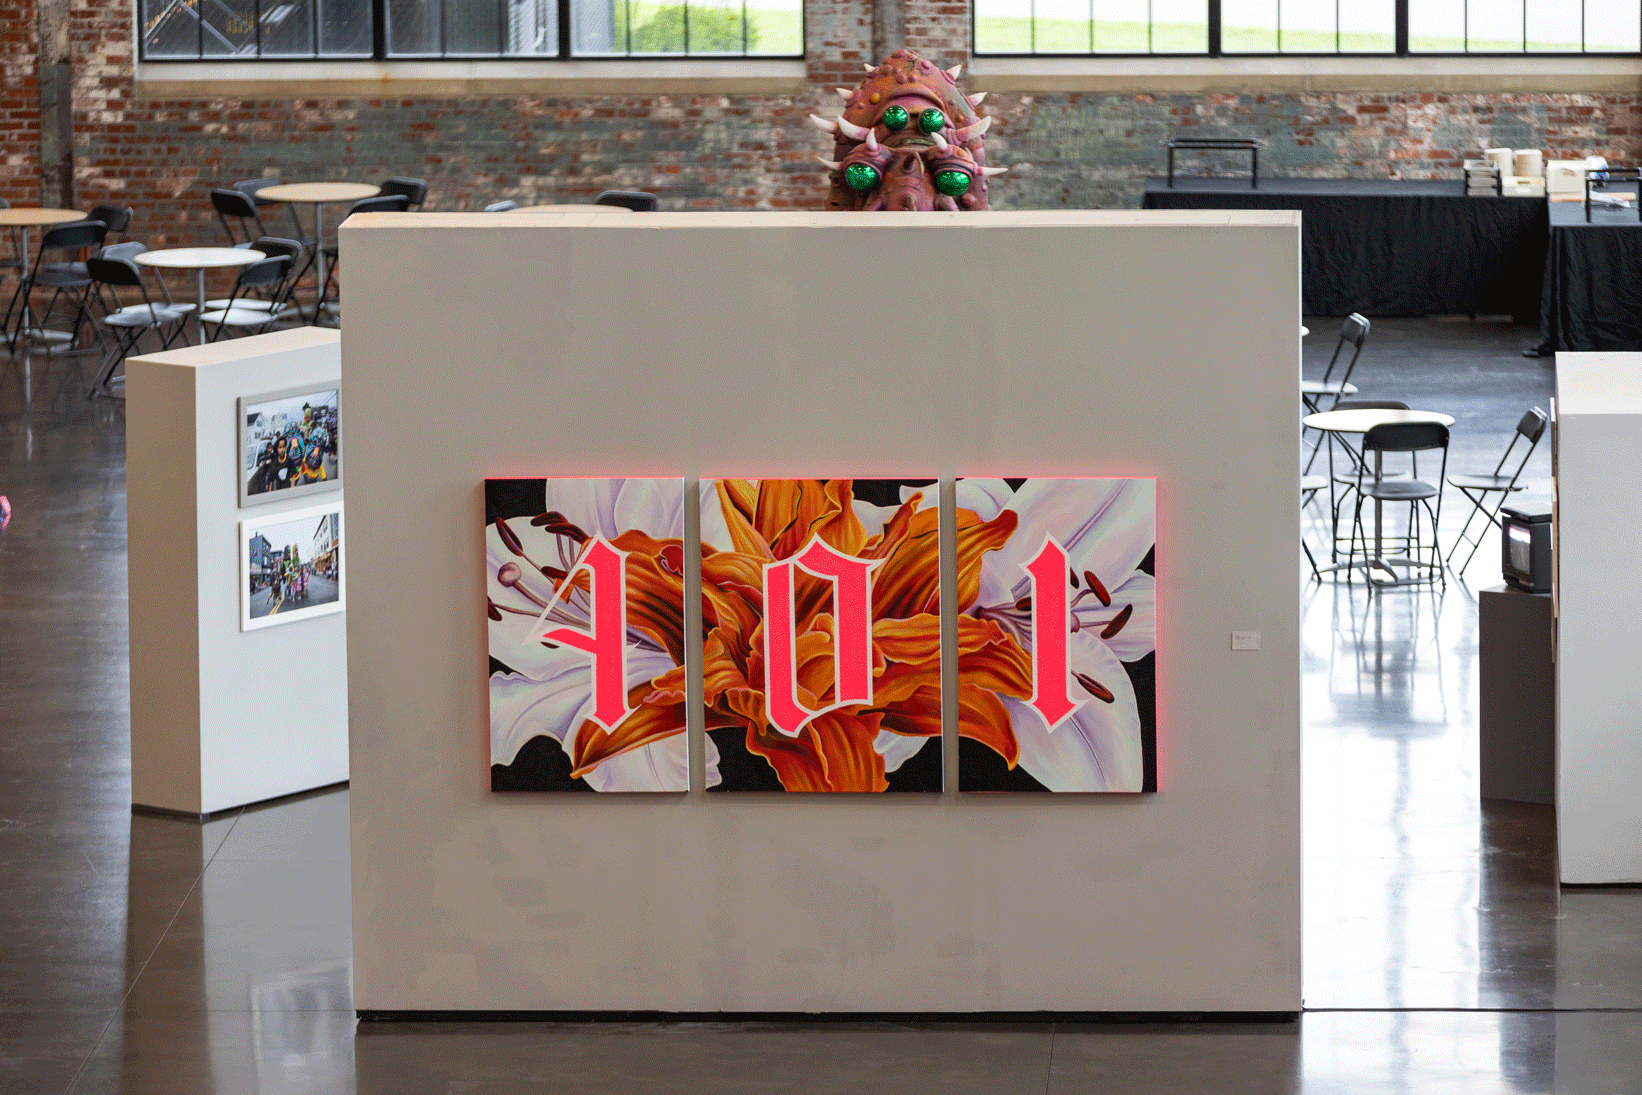 A print of a flower and the number "401" in neon pink paint divided across three canvases